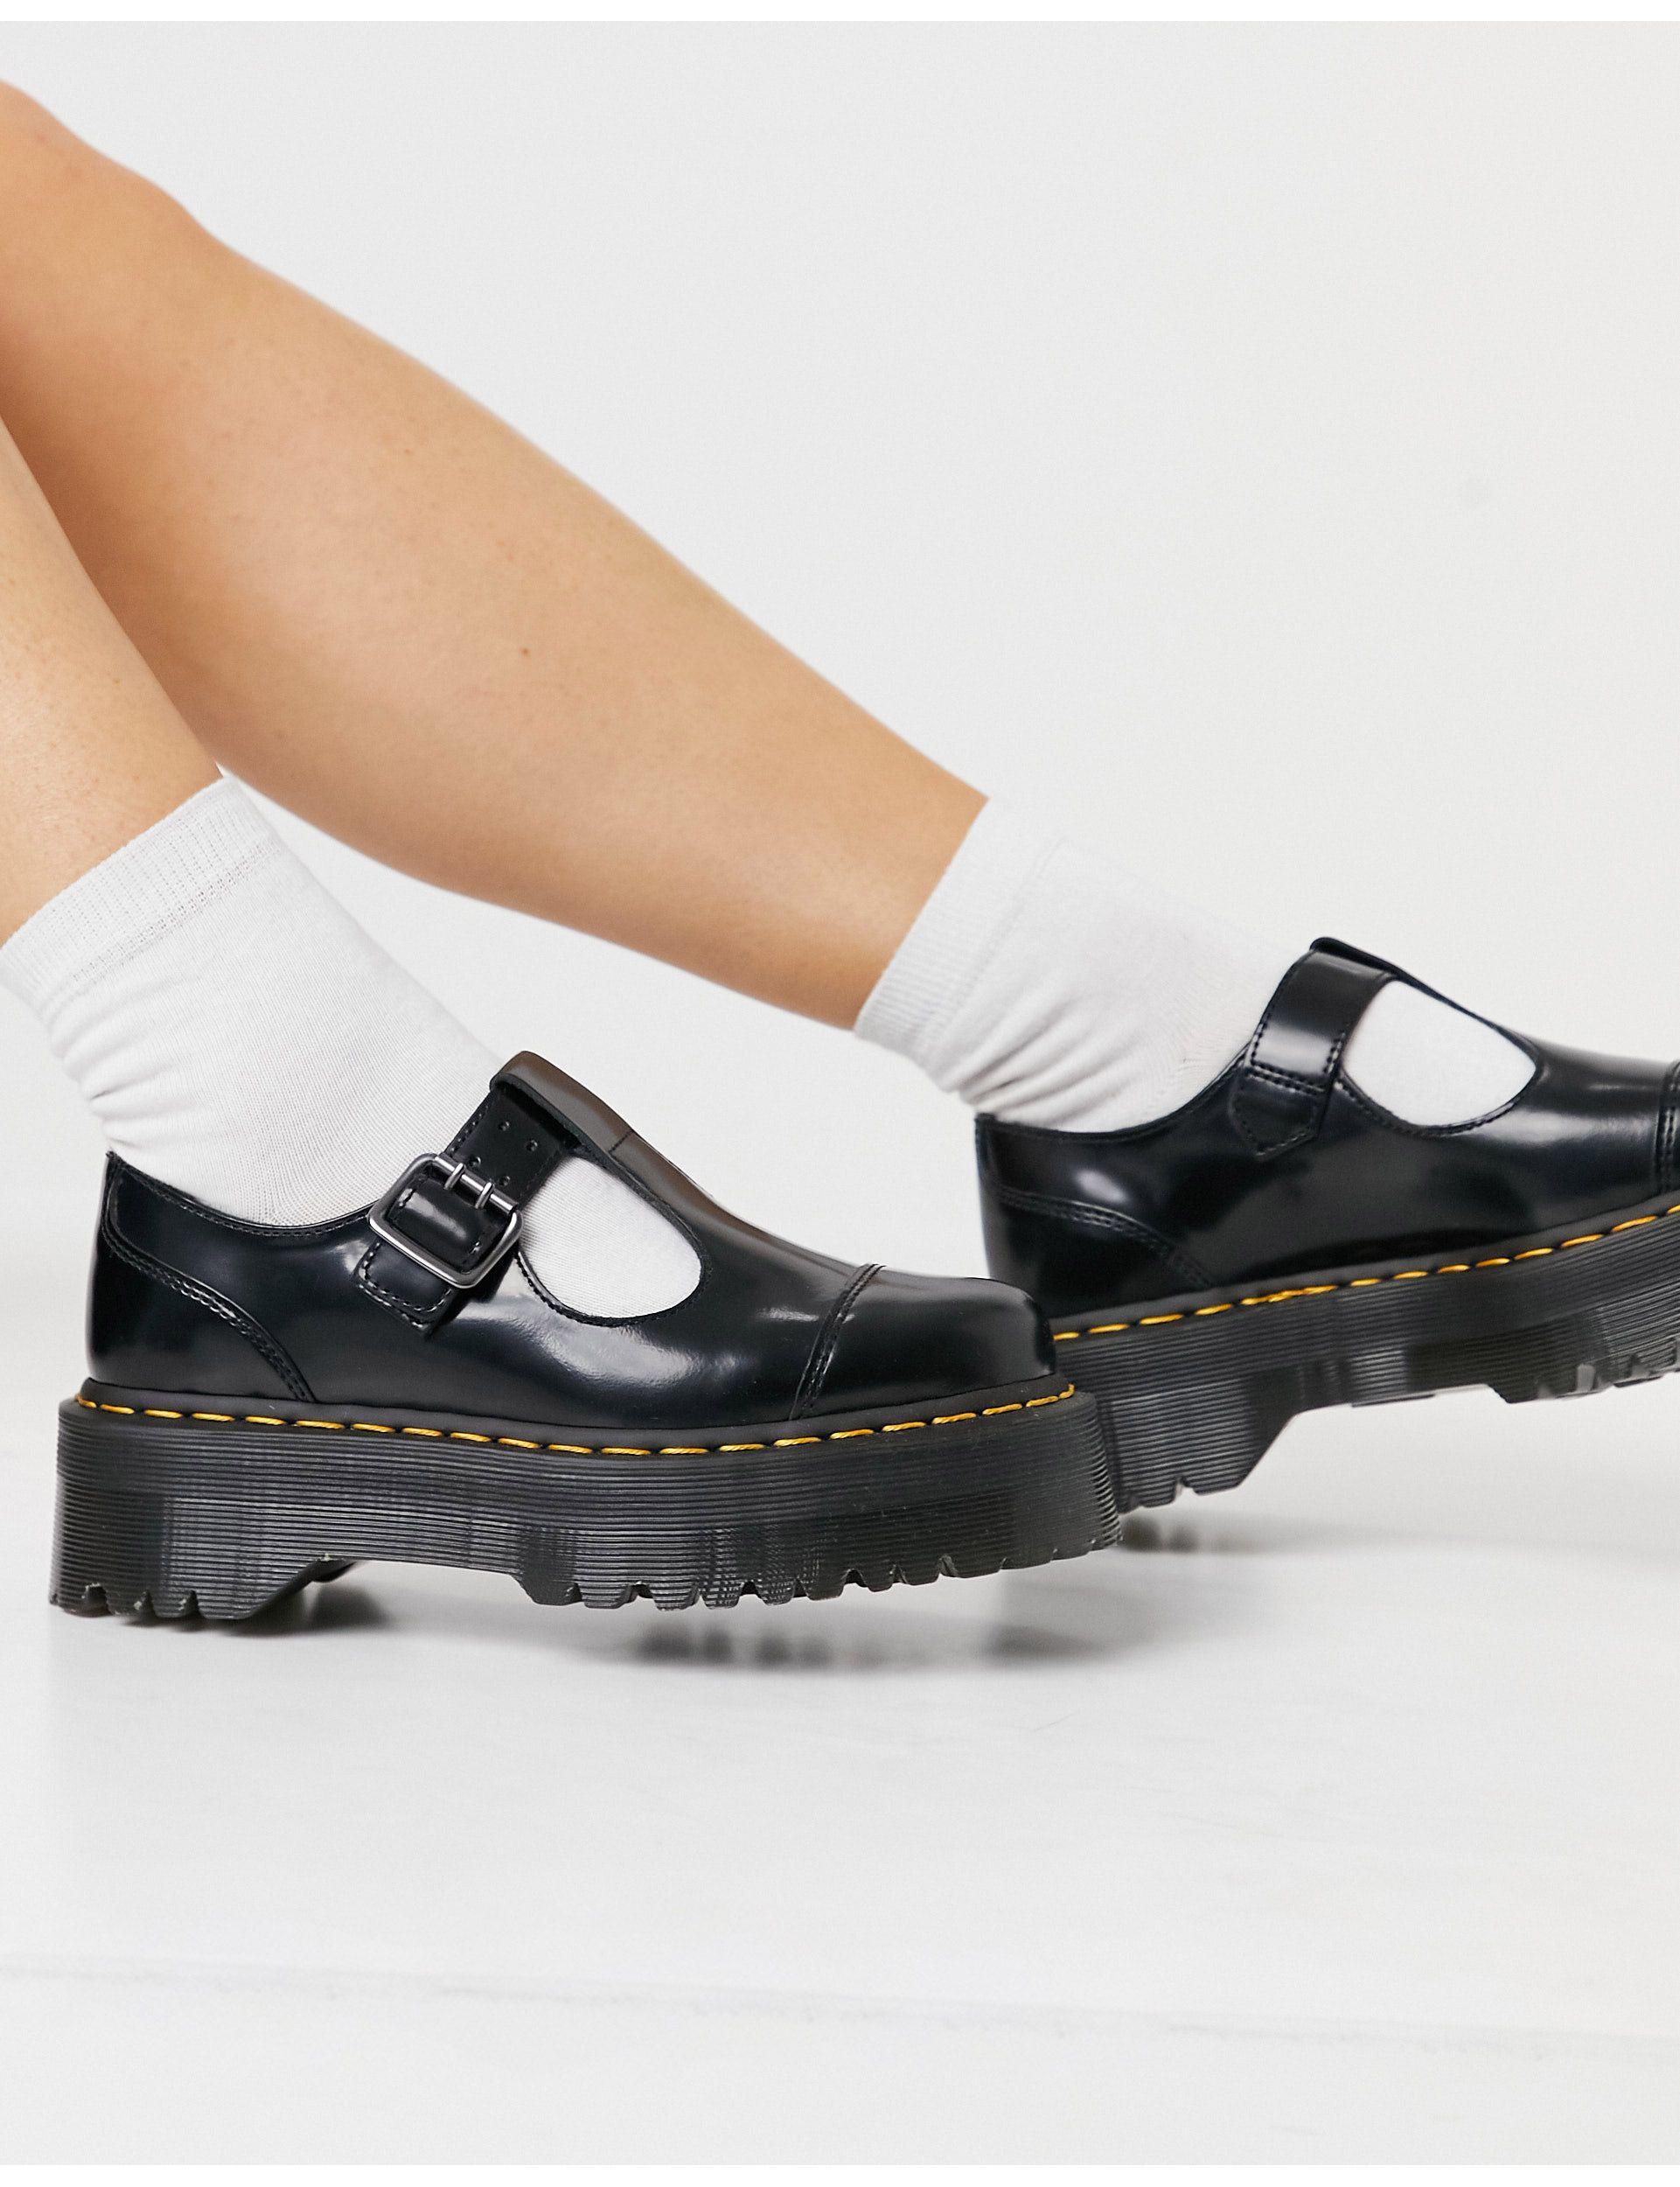 Dr. Martens Bethan Quad Retro Mary Jane Flat Shoes in Black | Lyst